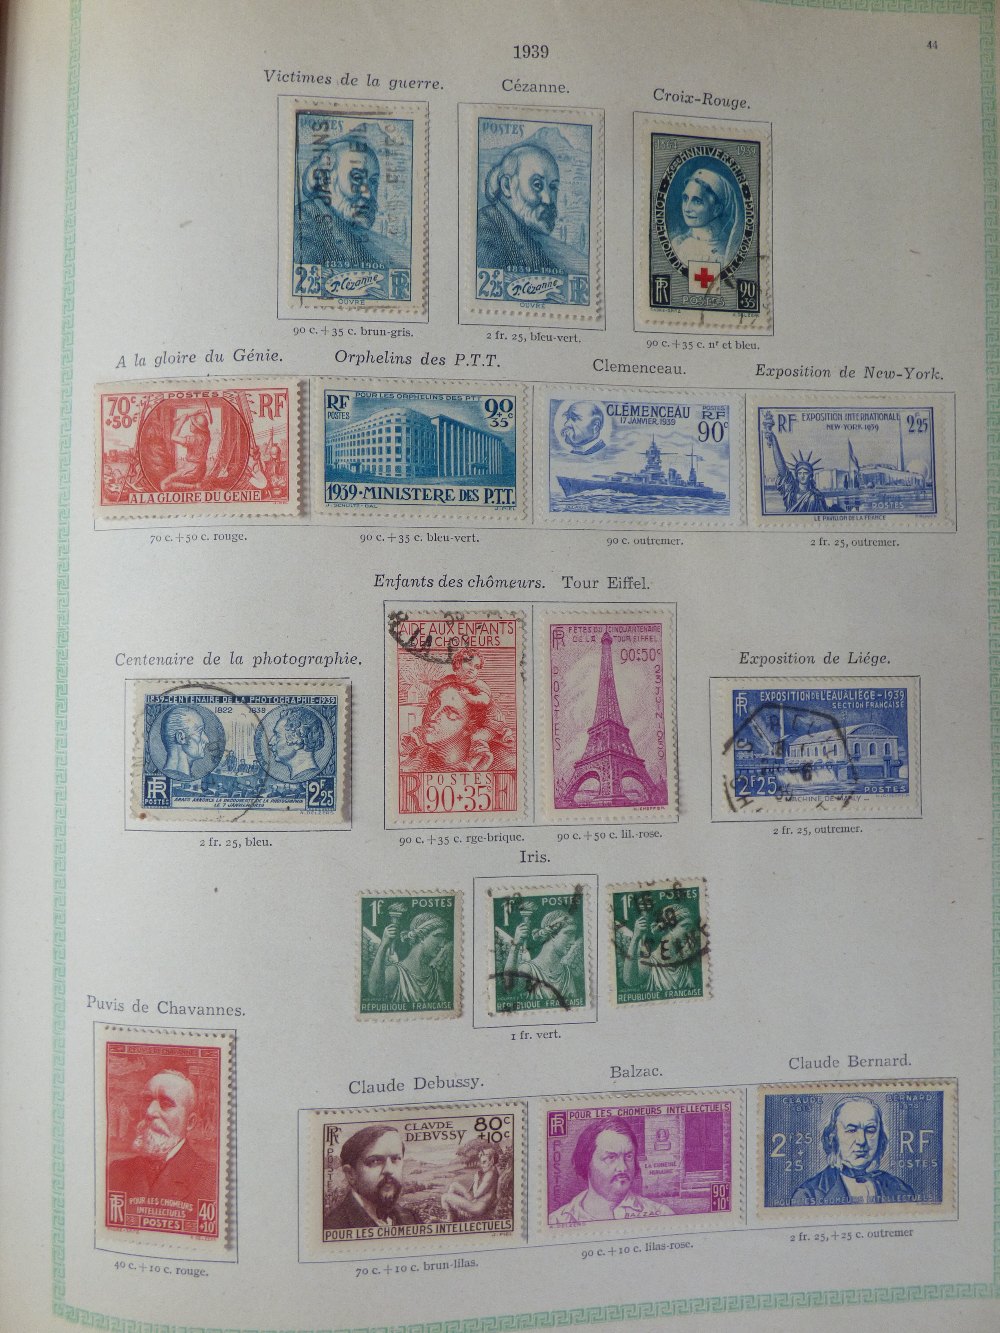 A collection of stamps from France in a Yvert & Tellier album, mint & used from 1853 to 1959 - Image 2 of 5